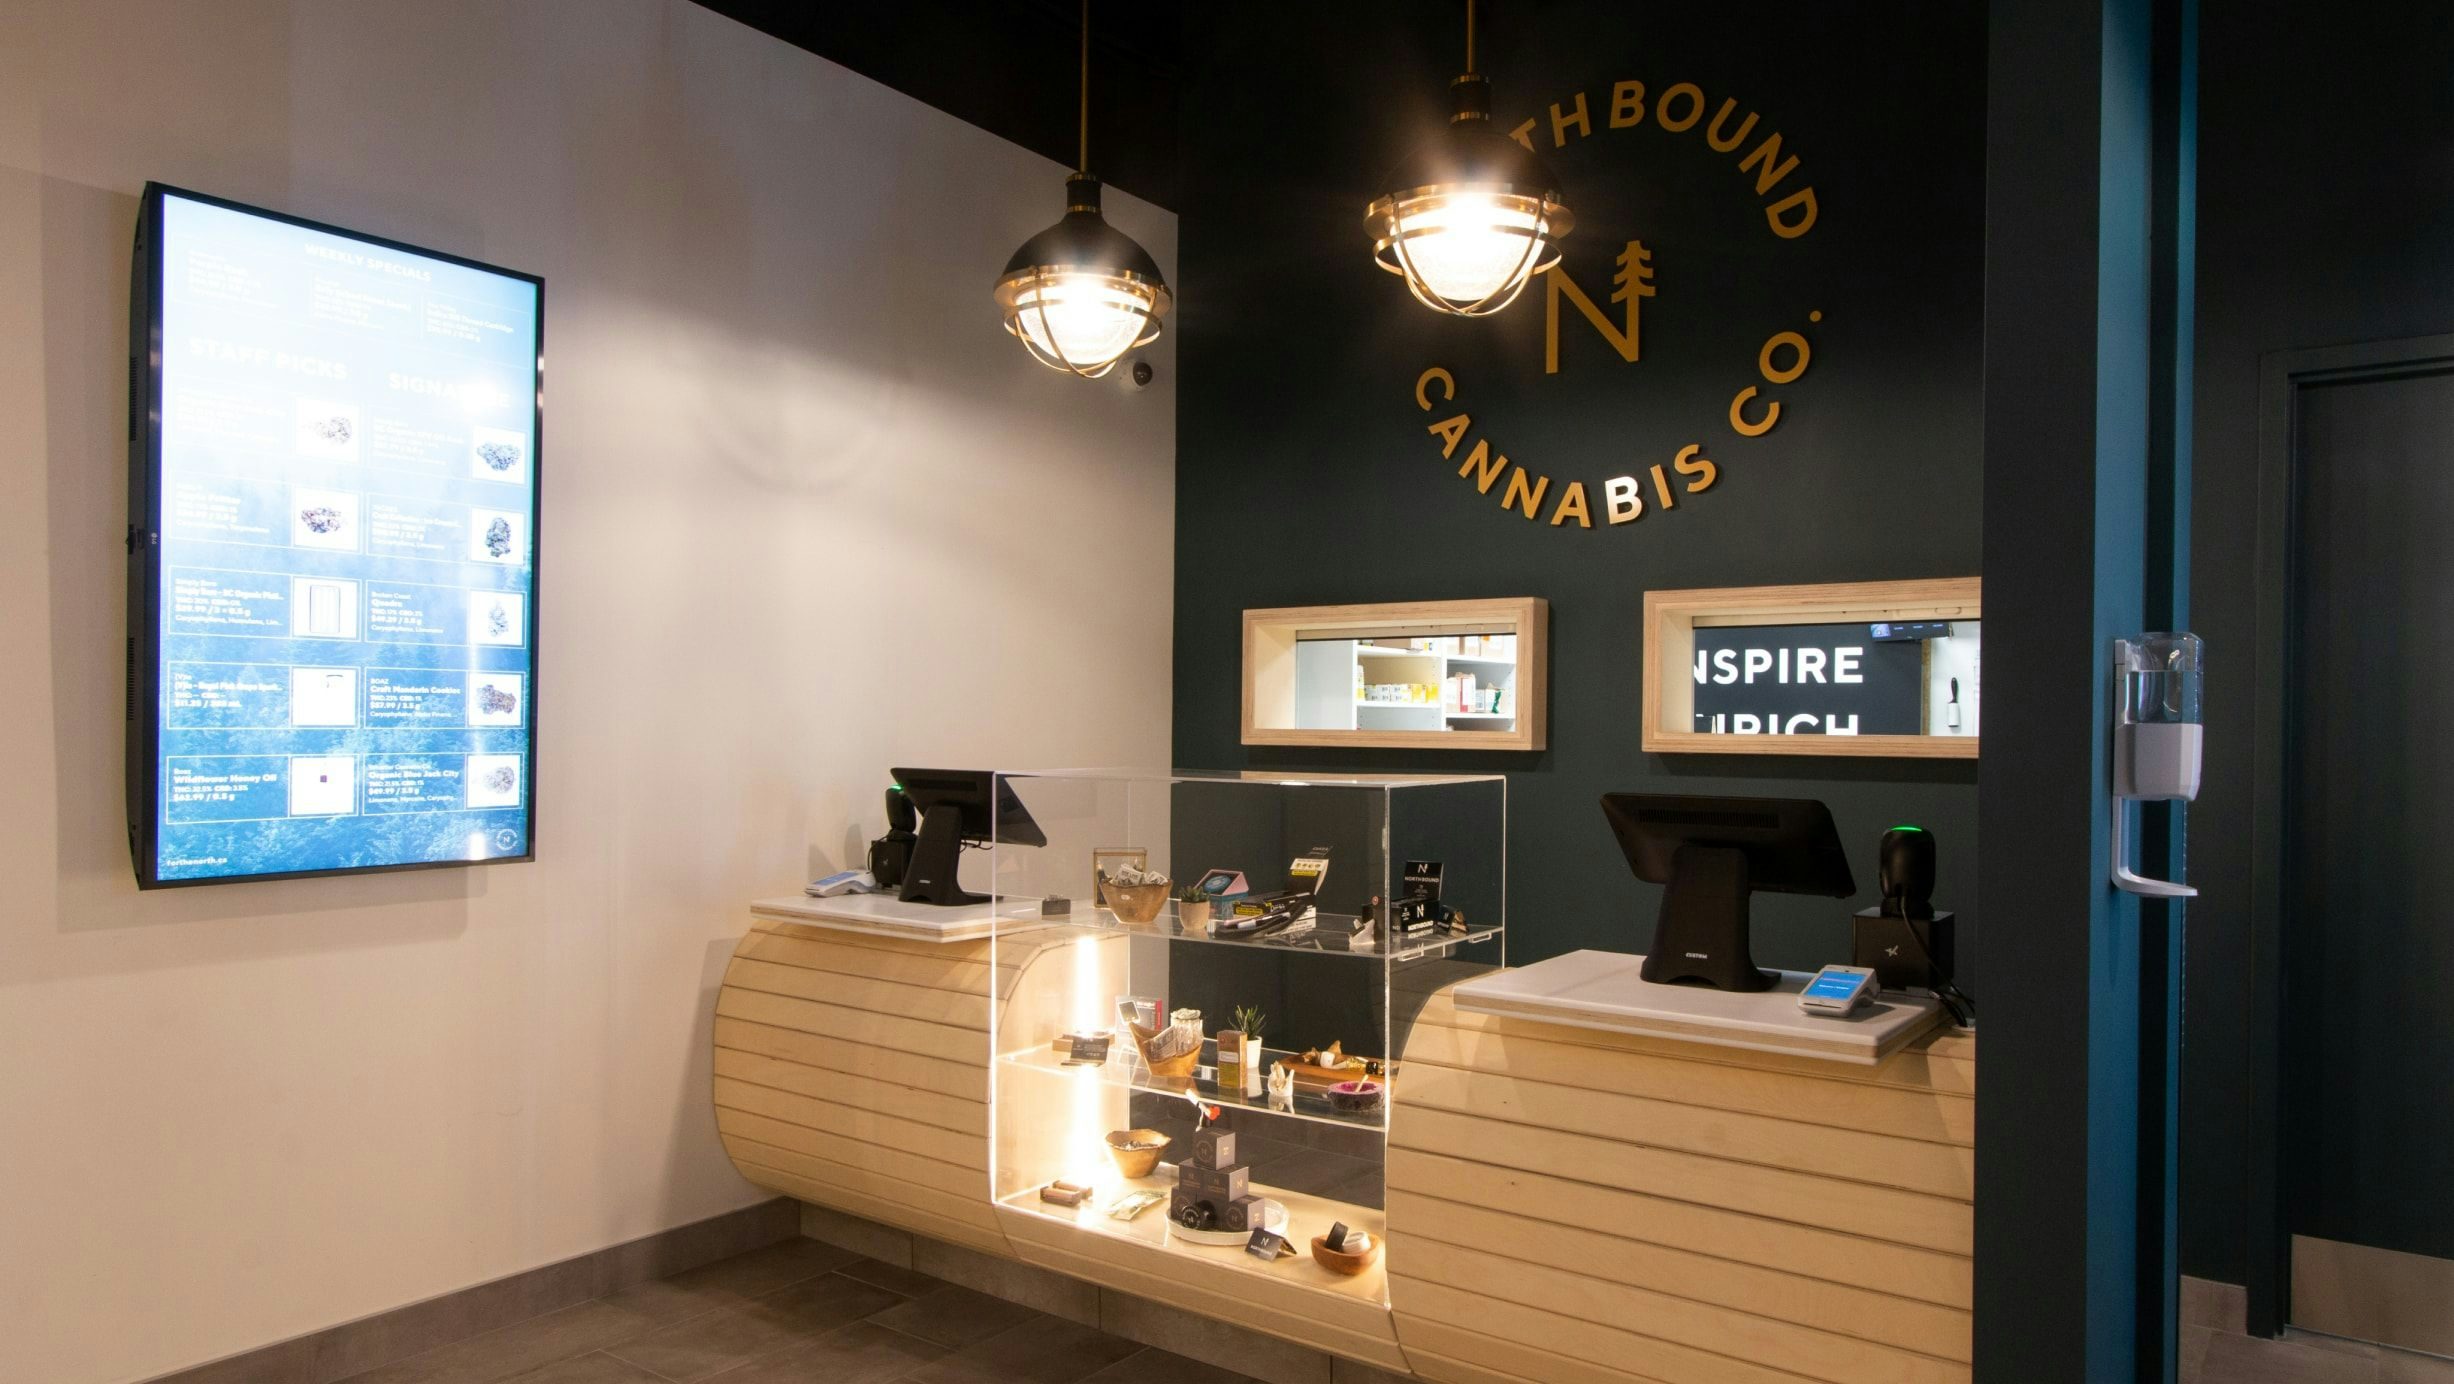 Branded front desk area at Northbound Cannabis Co. in Sudbury, Ontario